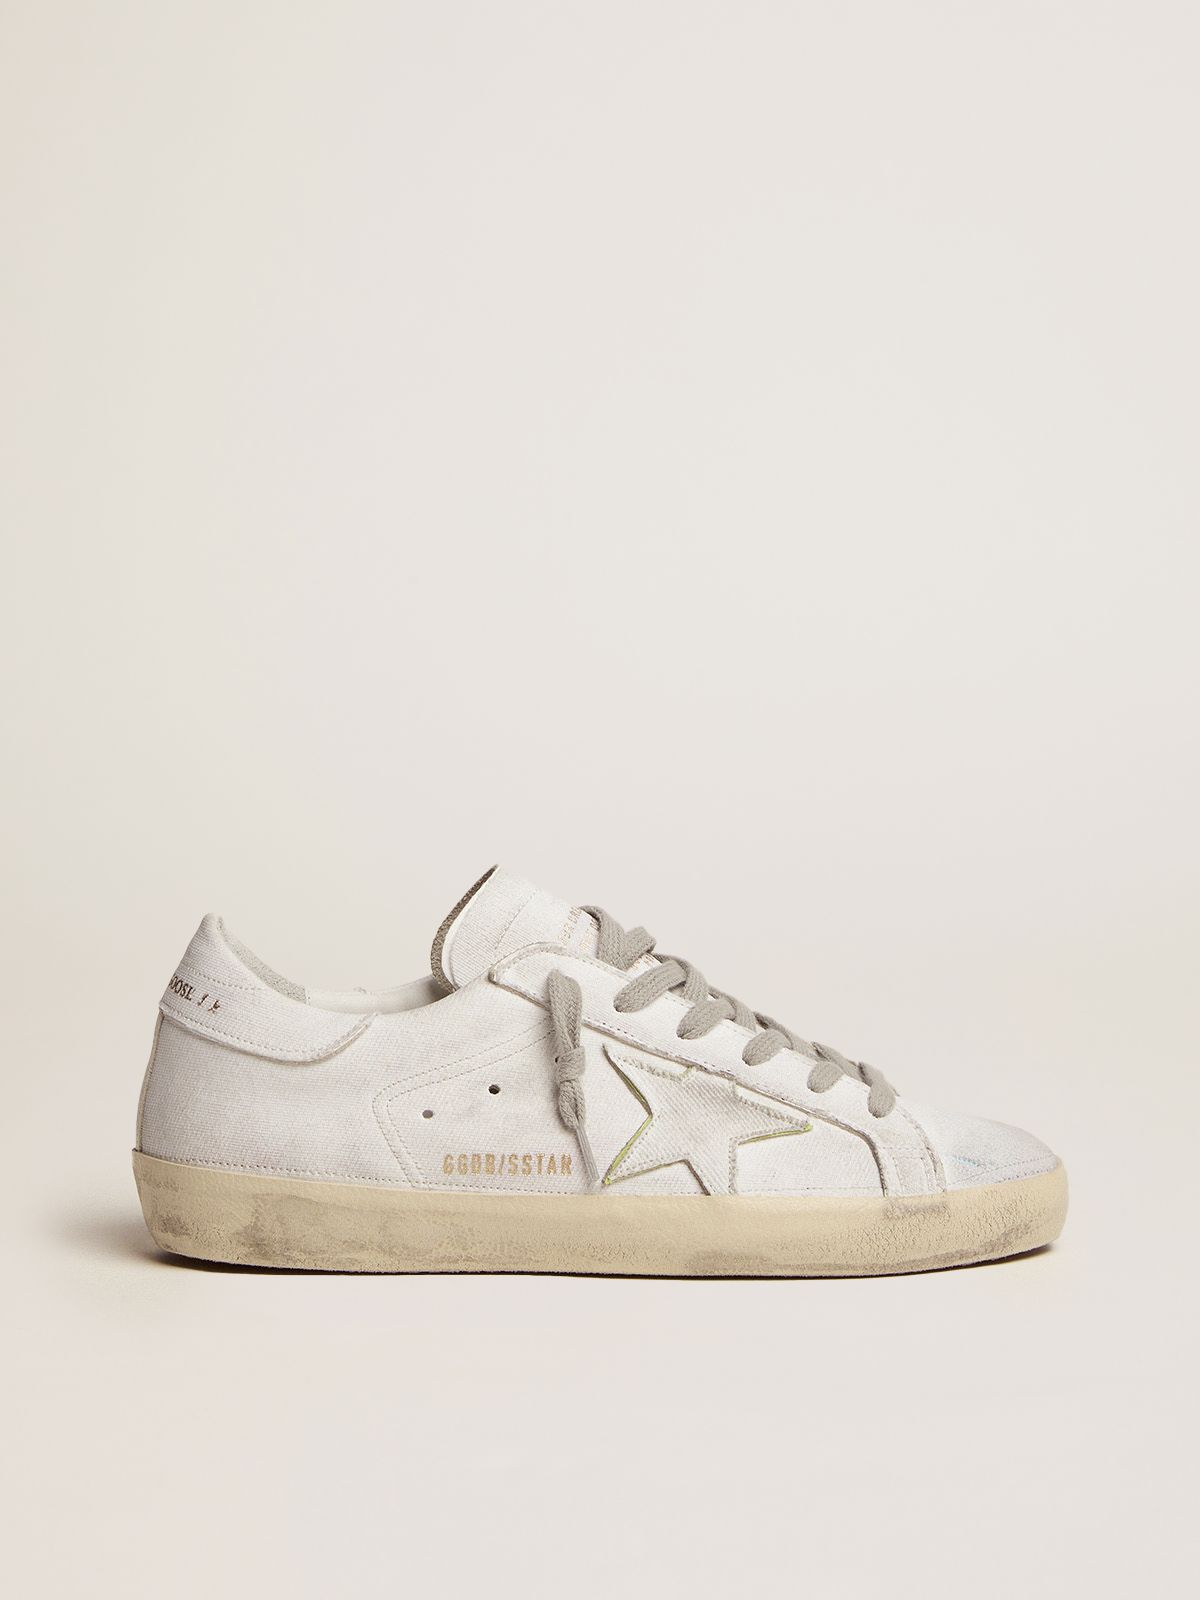 Sneakers Uomo Golden Goose Super-Star Dream Maker sneakers in white color with reverse construction and hidden multicolor details